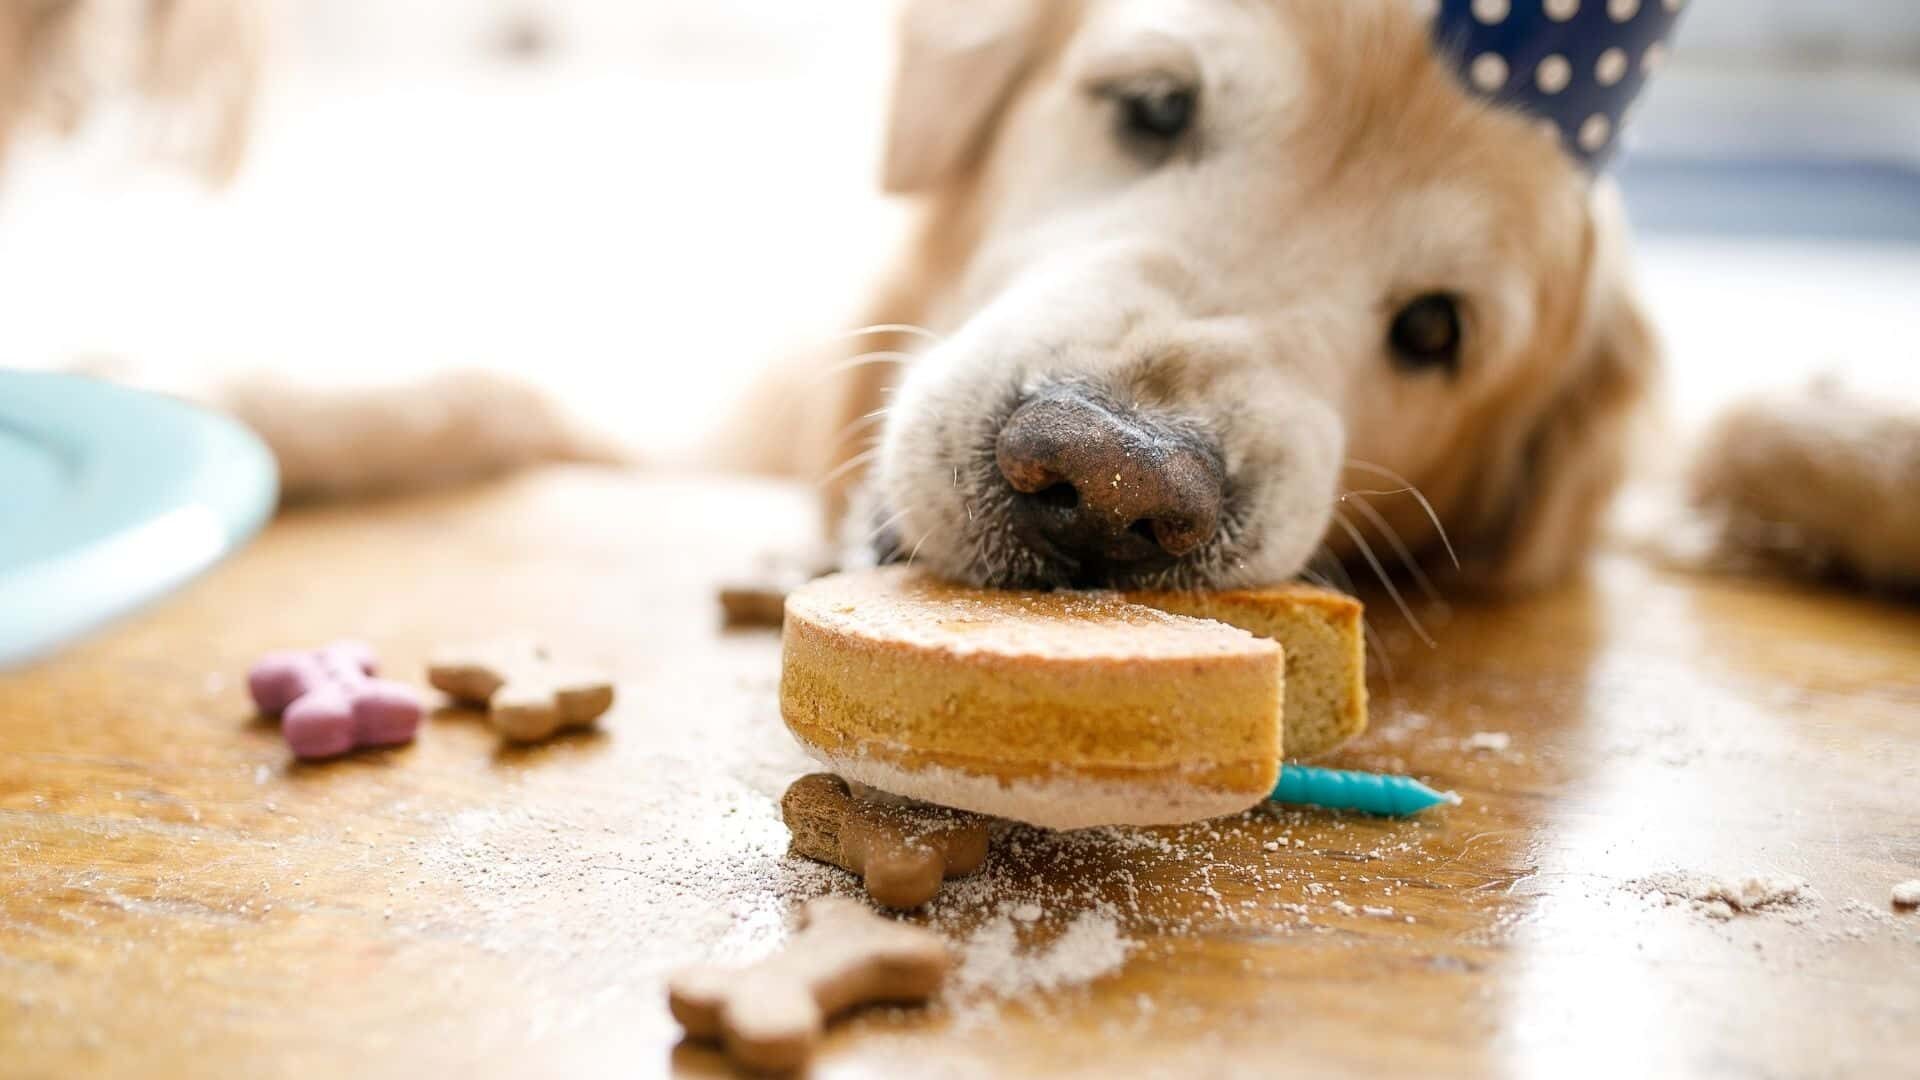 Cake for dogs without peanut butter